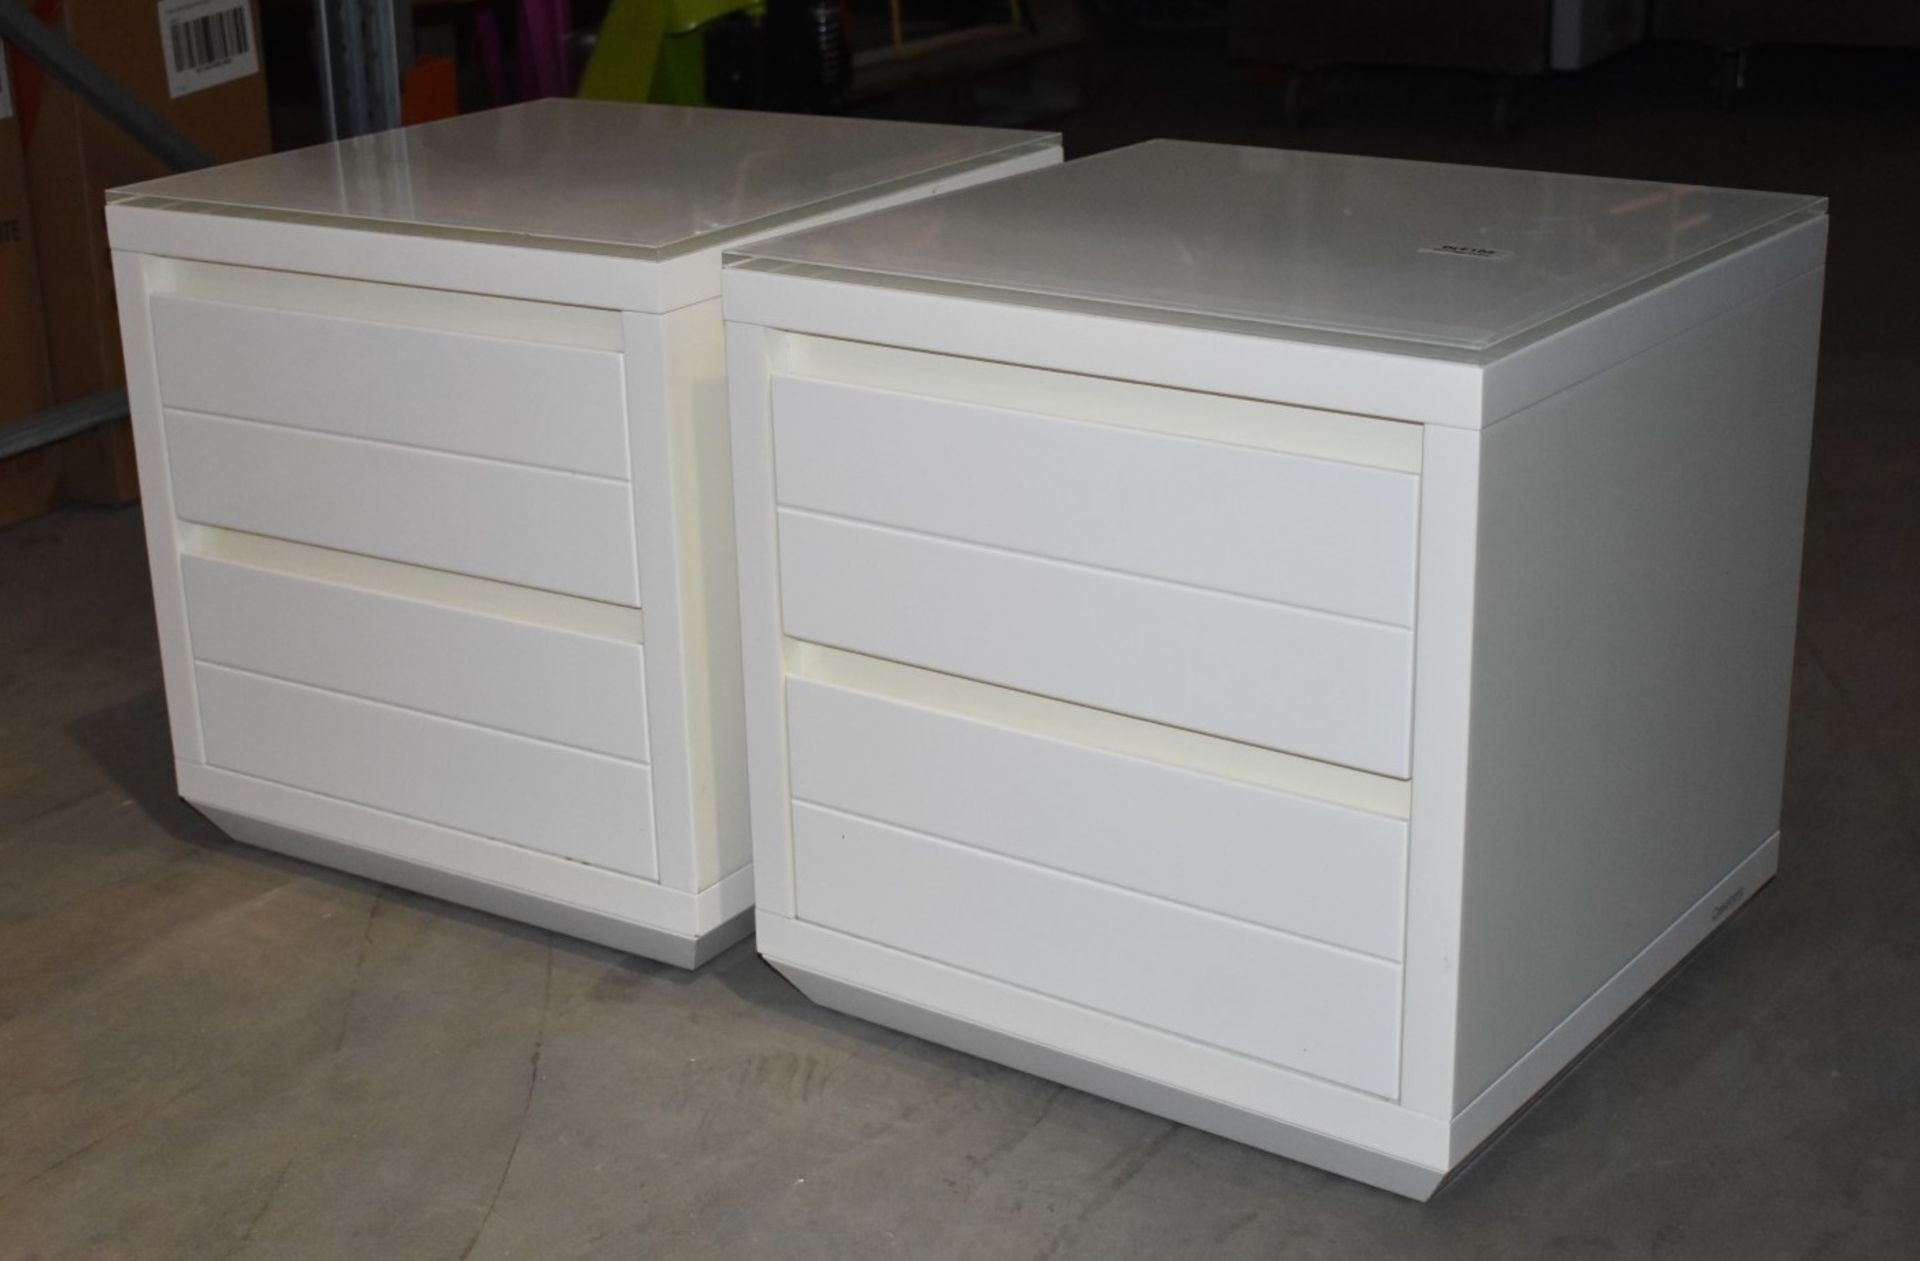 1 Pair of Casabella Adria Bedside Drawers - White Gloss With Glass Top and Soft Close Drawers  - - Image 6 of 6